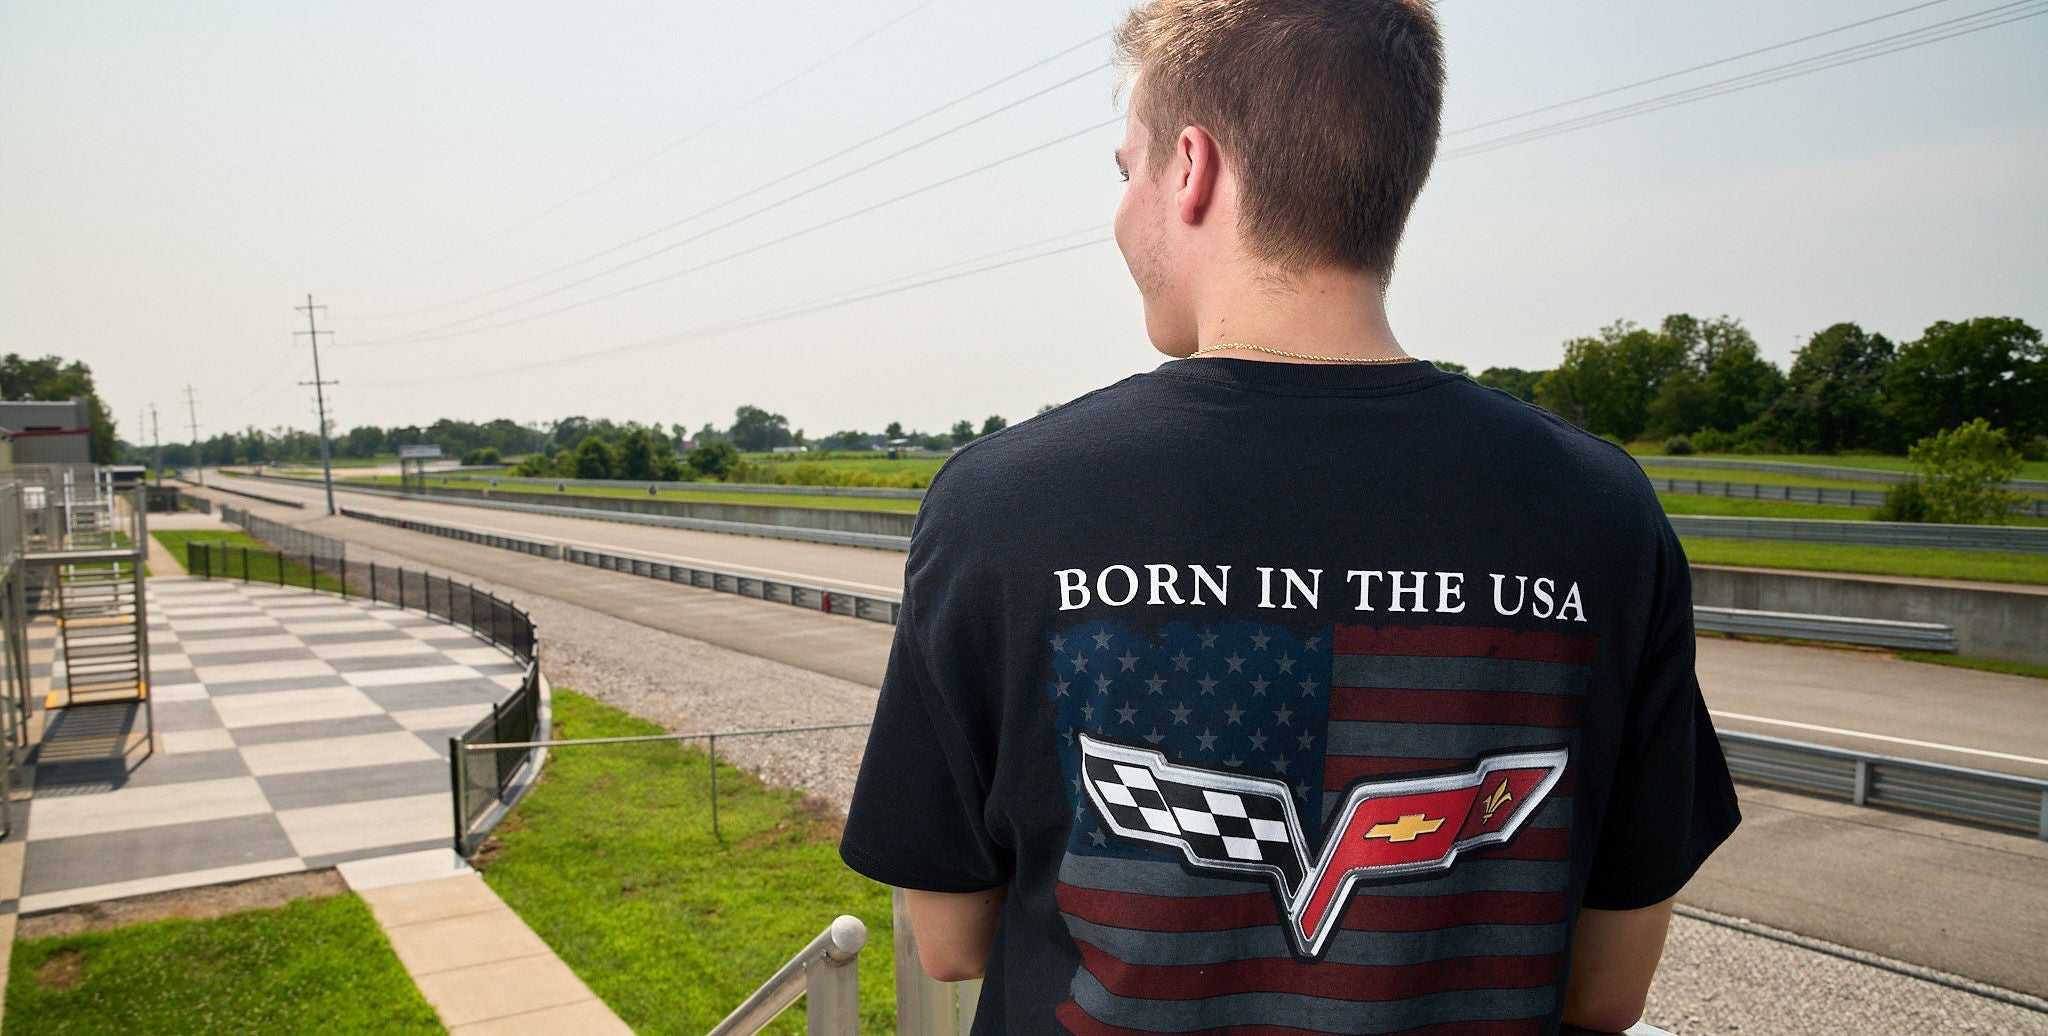 man wearing Corvette t-shirt at the track